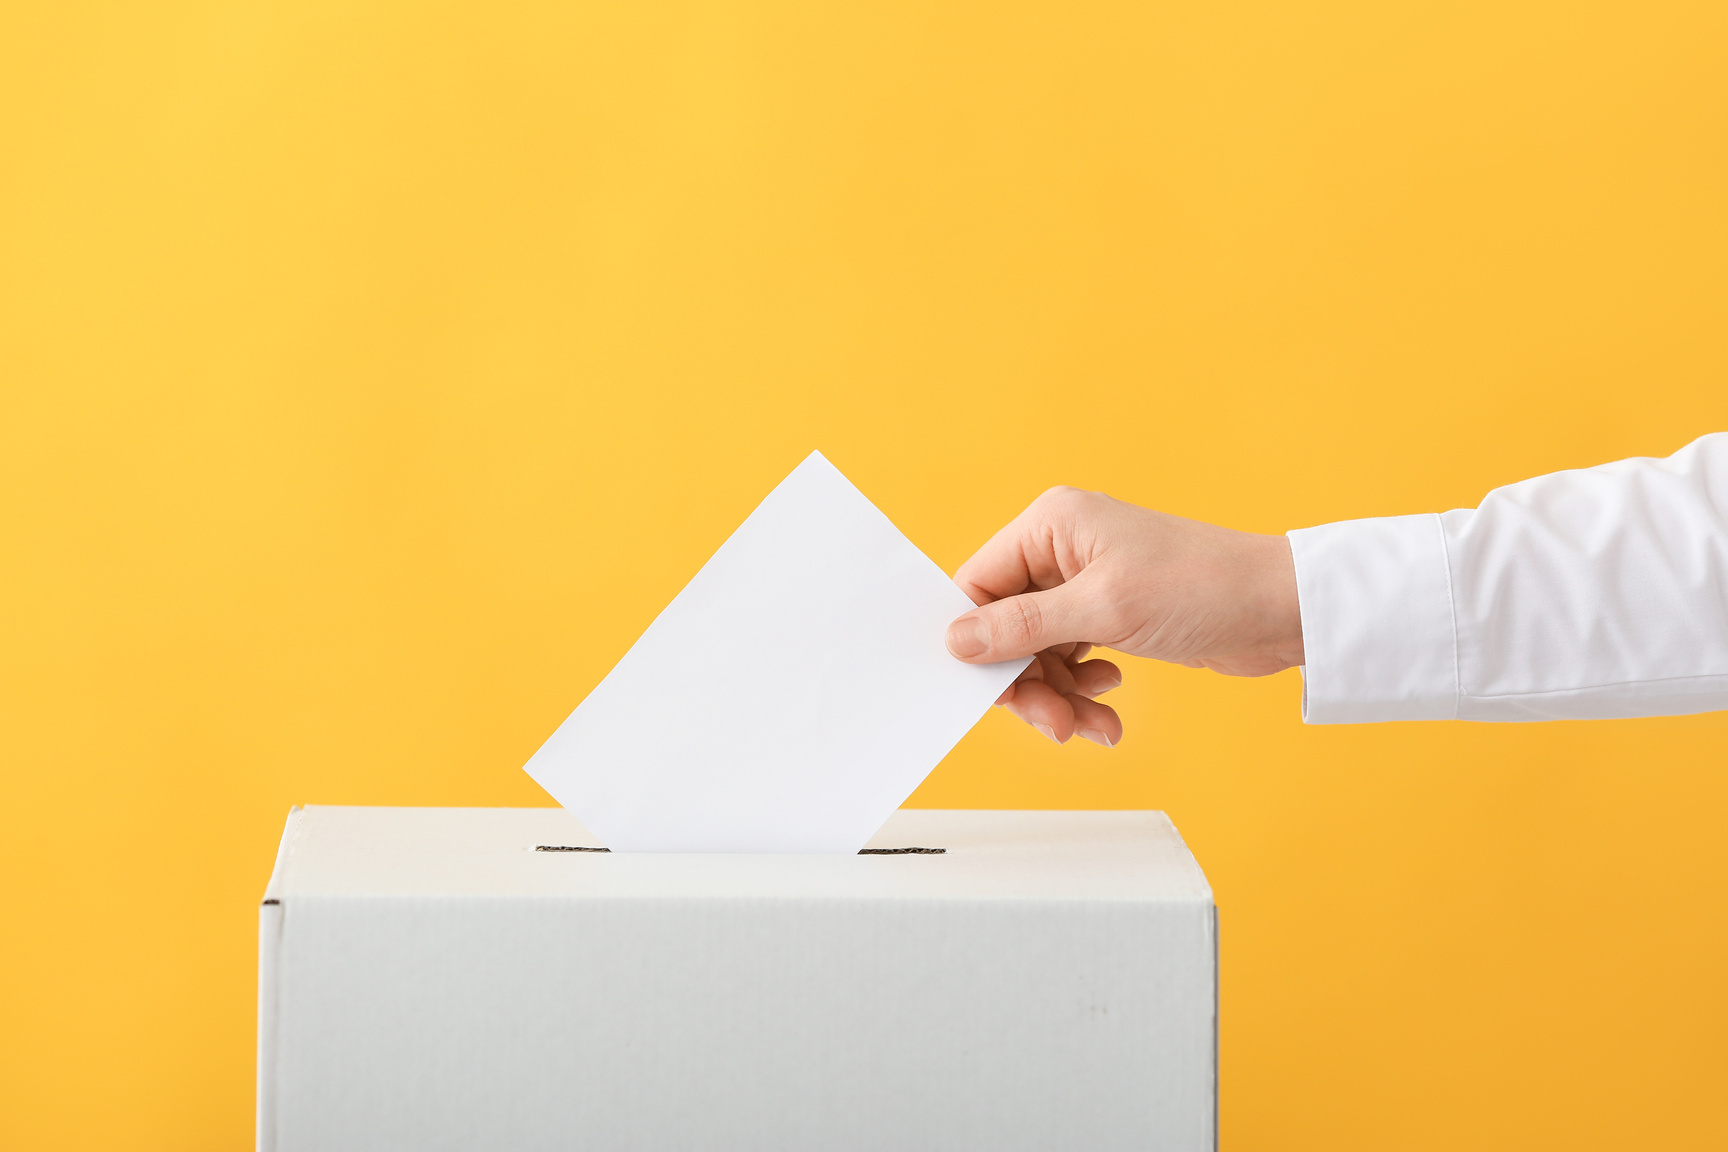 Voting near Ballot Box on Color Yellow Background